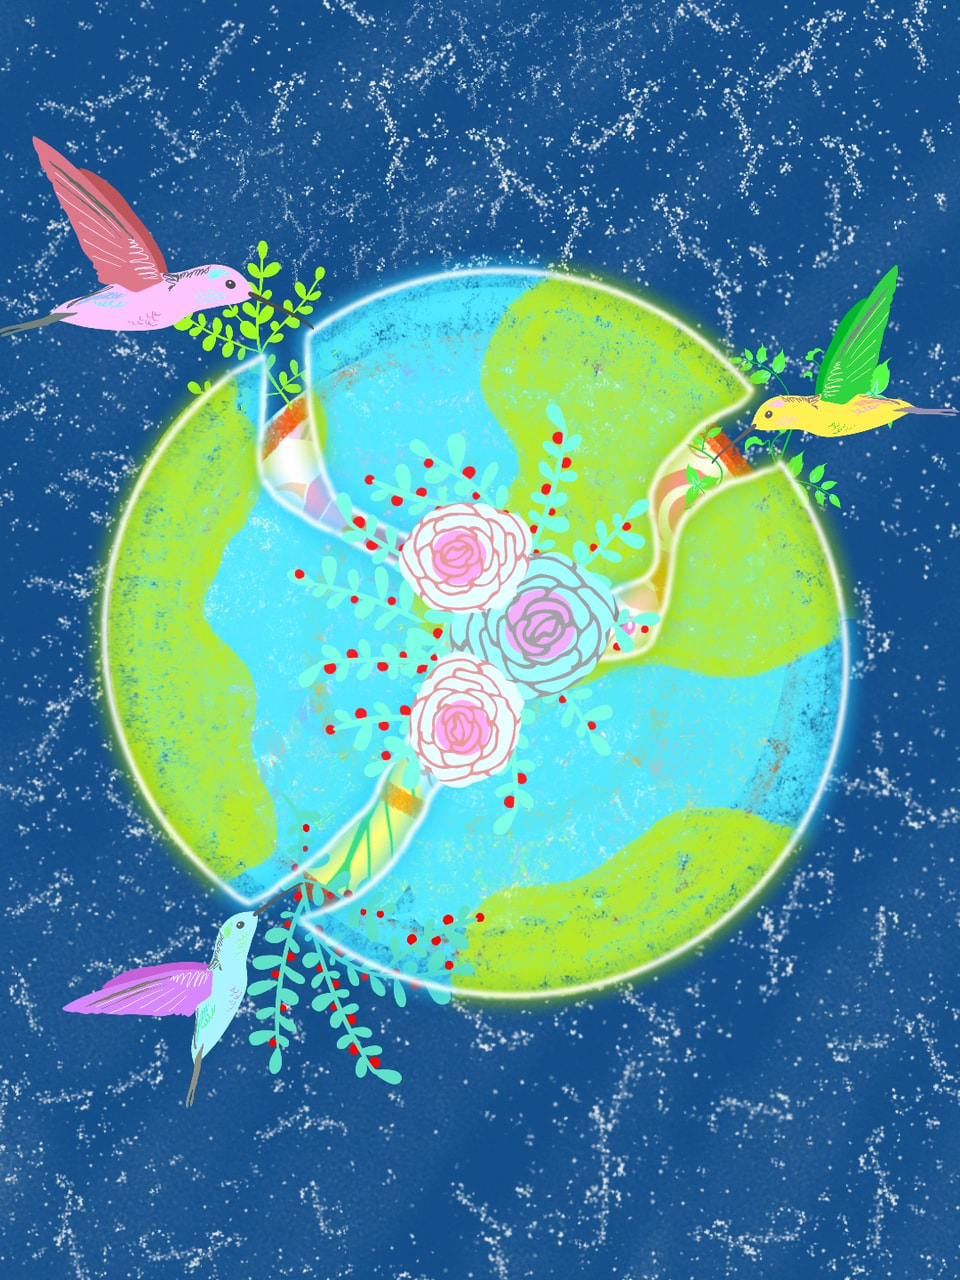 #endoftheworld #fridayswithsketch #Earth #flowers #hummingbird #Nature -A beautiful end to the world❤🌏❤